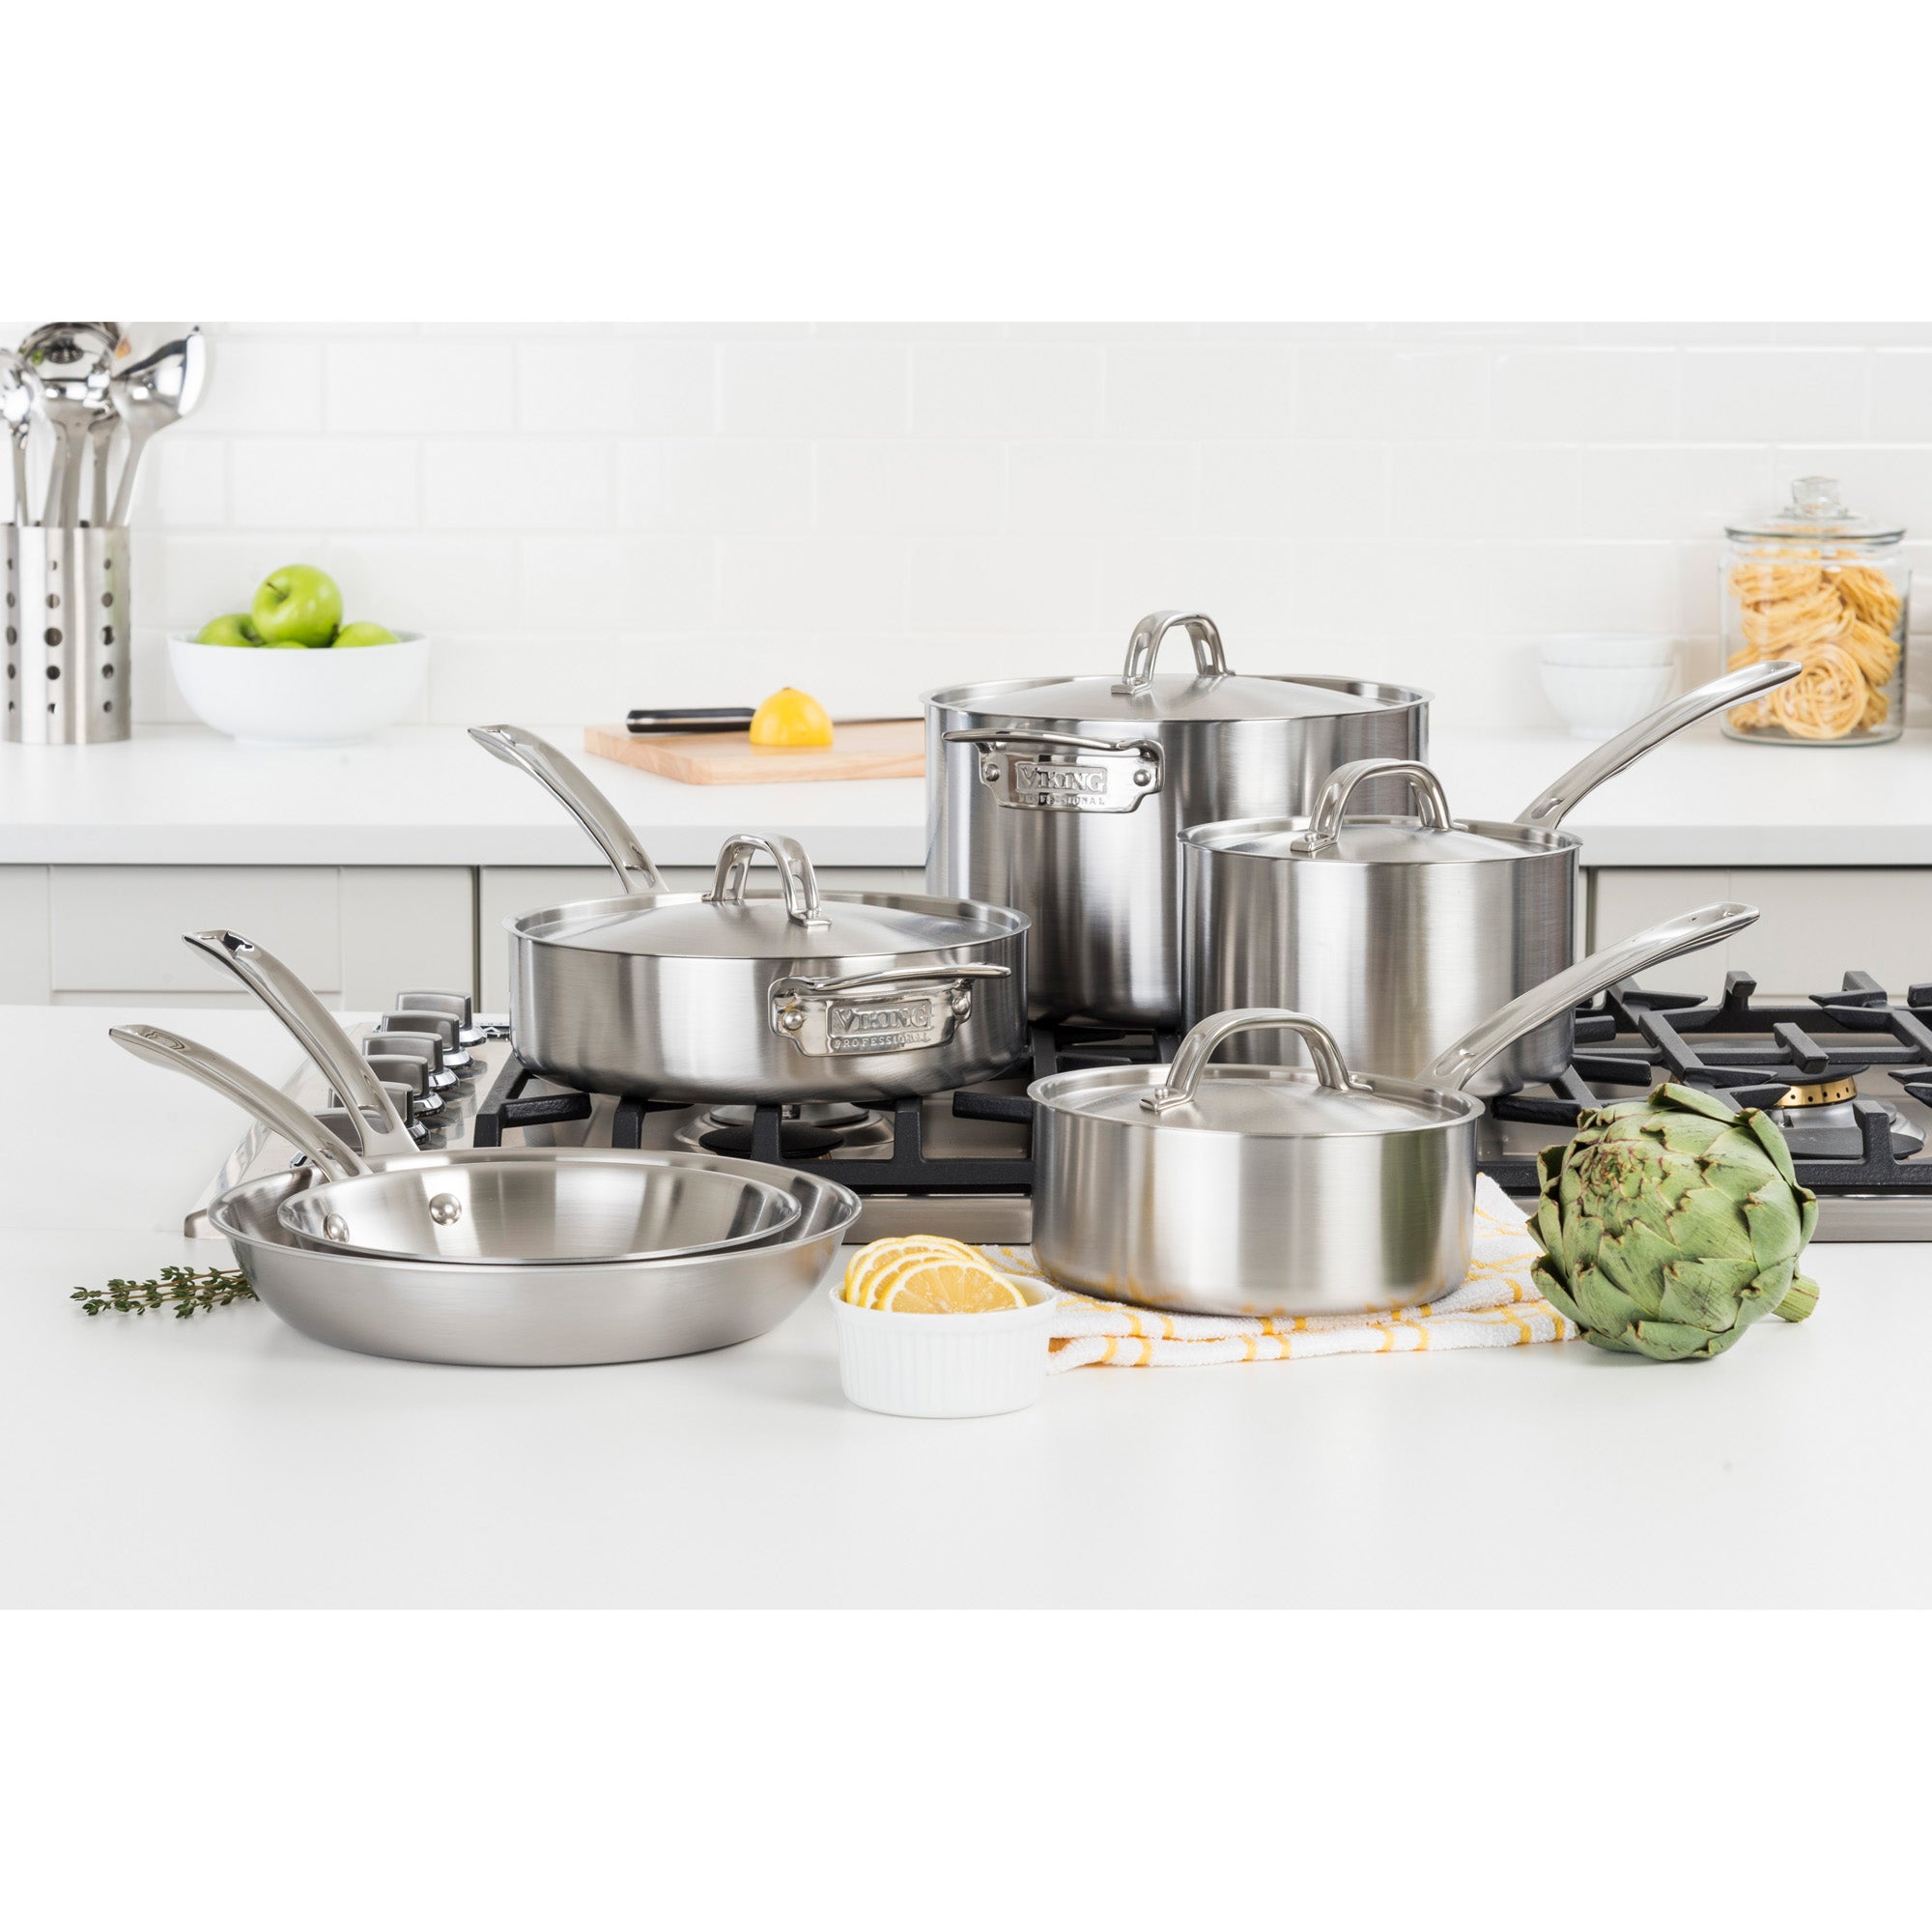 Signature Stainless Steel 6-Piece Cookware Set